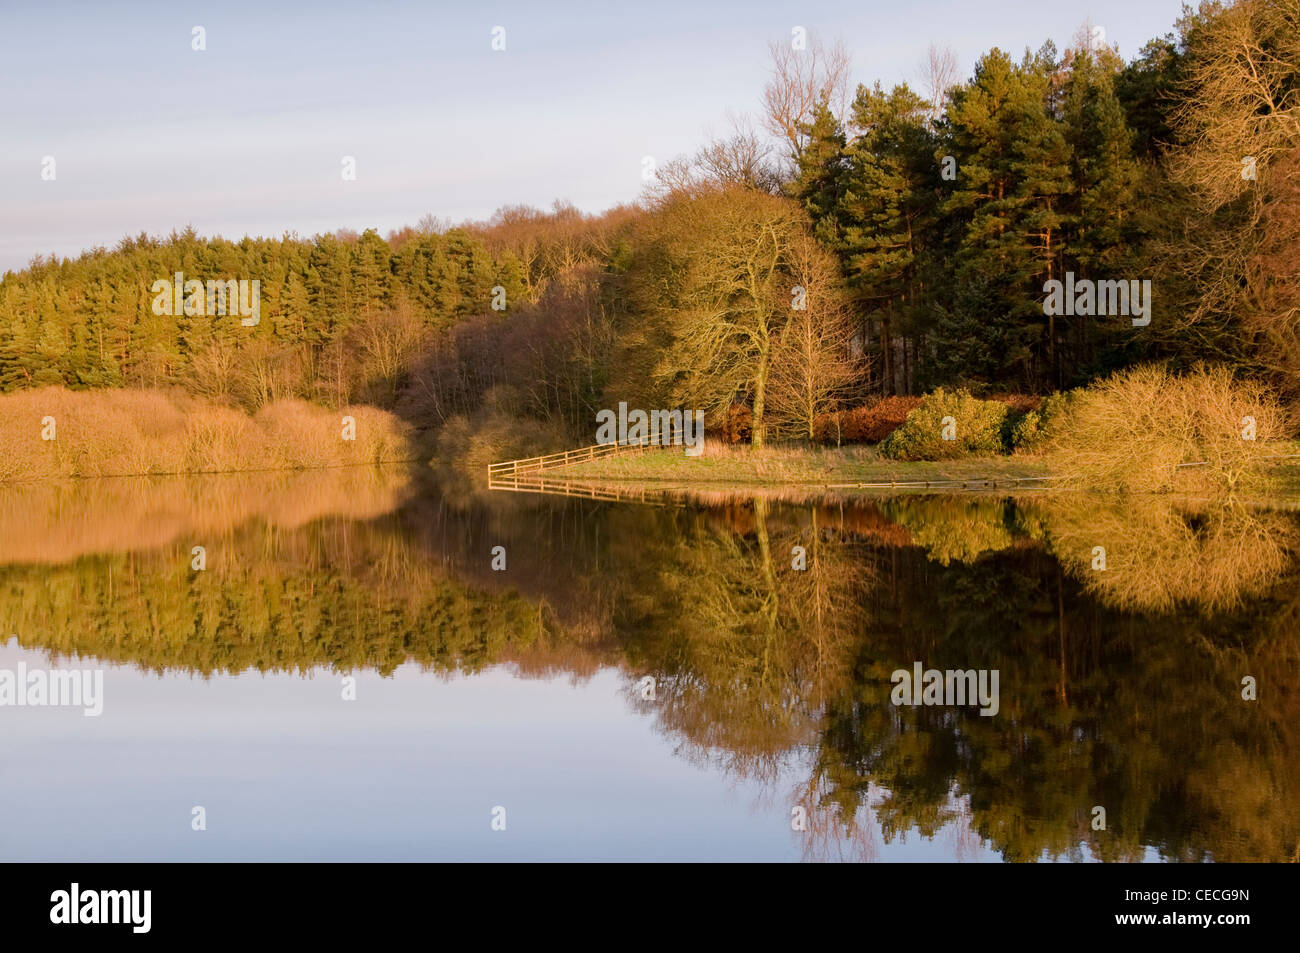 Beautiful scenic landscape - woodland trees (bright autumn colour) reflected on still, calm water - Swinsty Reservoir, North Yorkshire, England, UK. Stock Photo